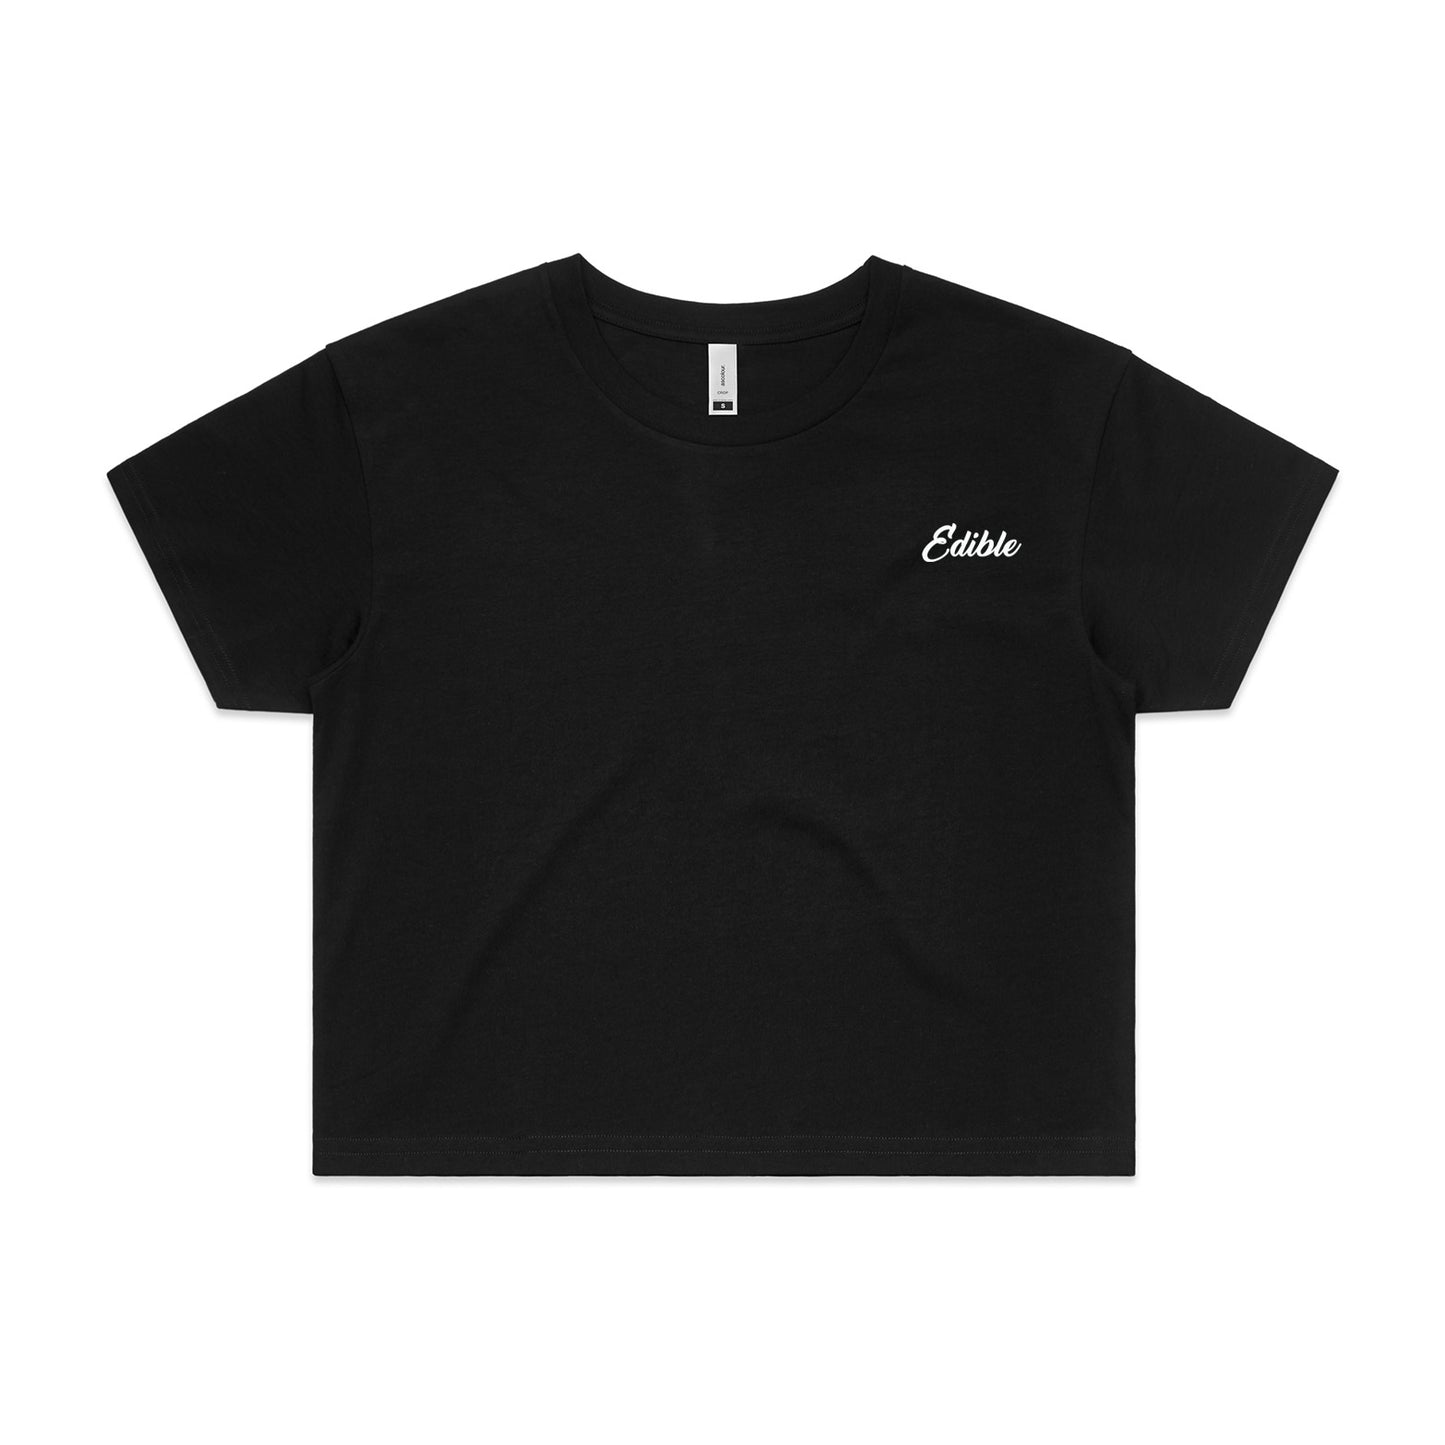 "Edible" Embroidered Women's Crop Top T-Shirt